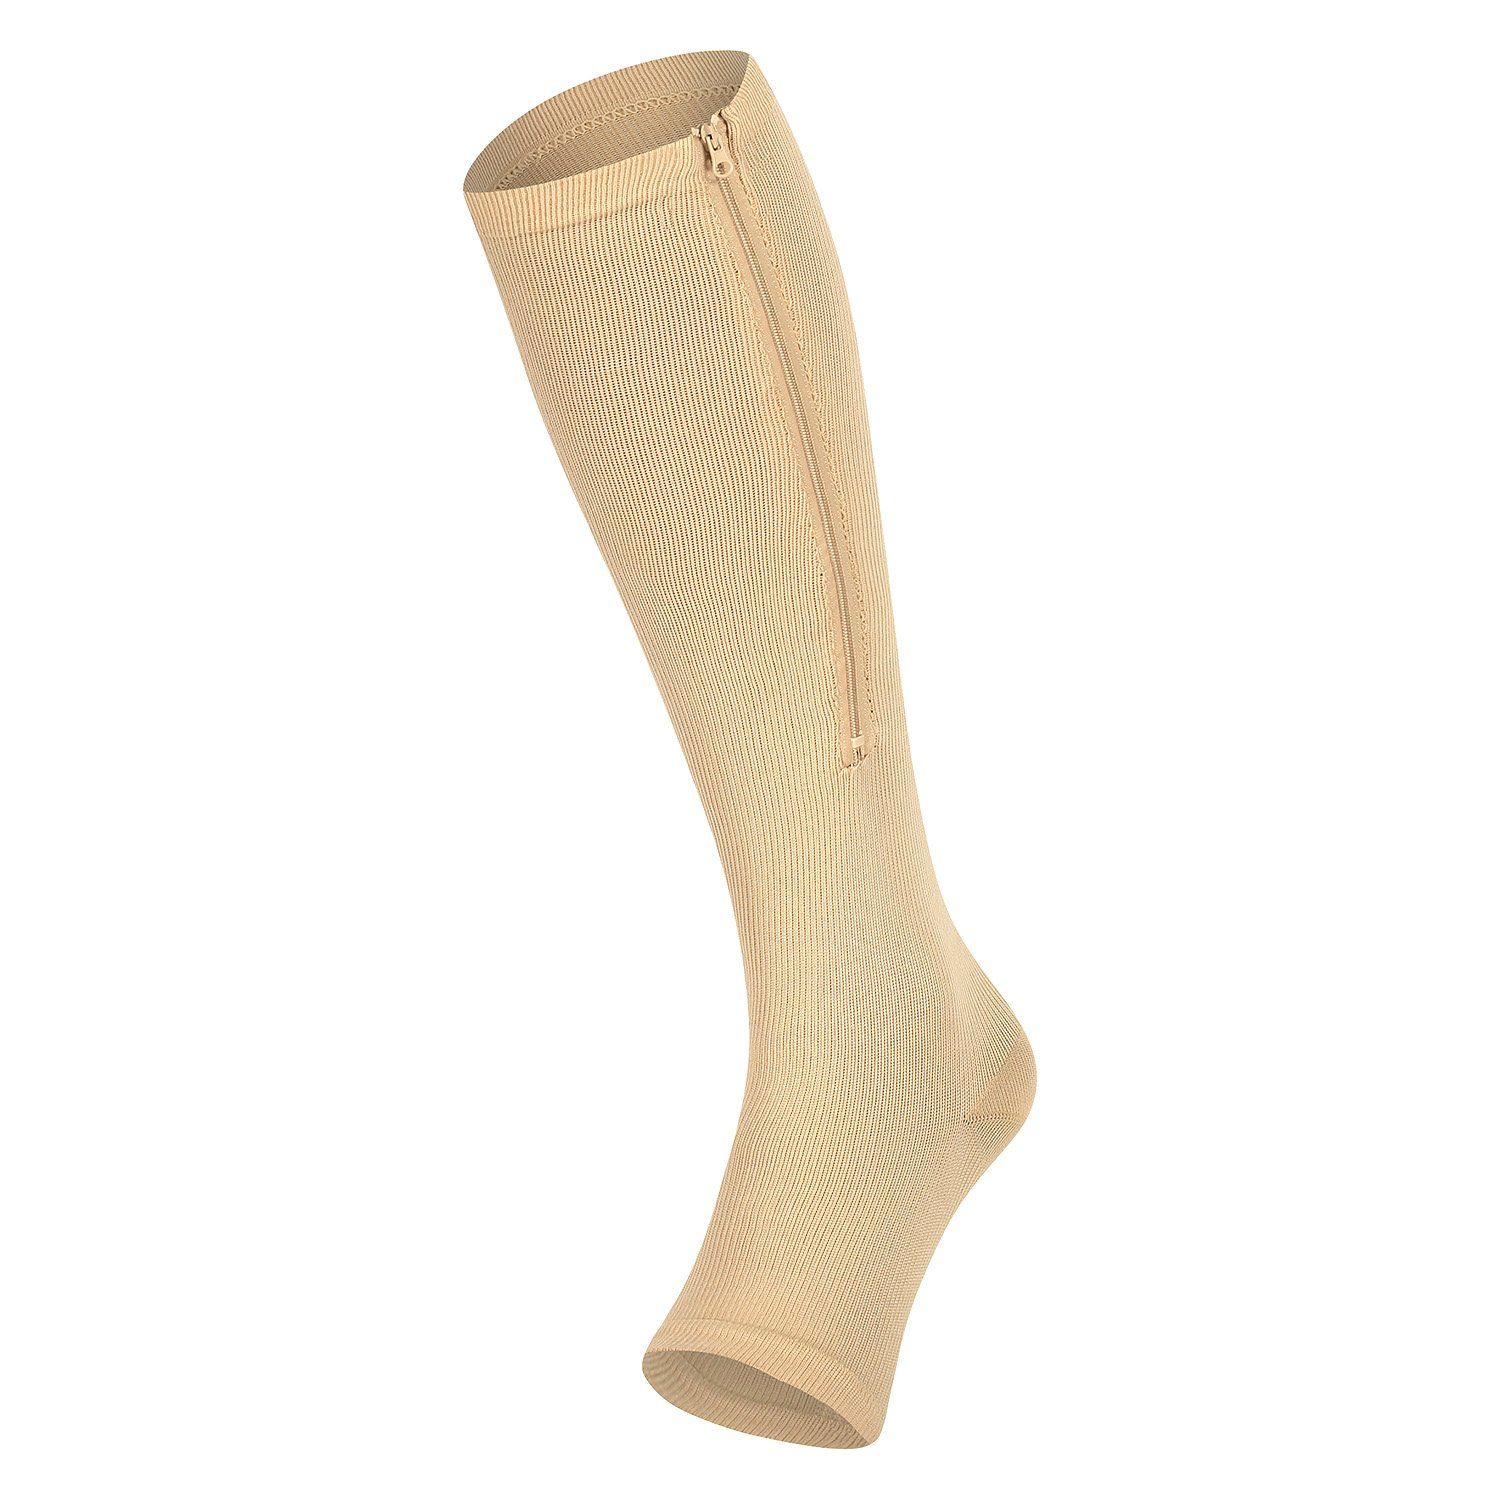 Support Stocking with Zipper - Open Toe - beige